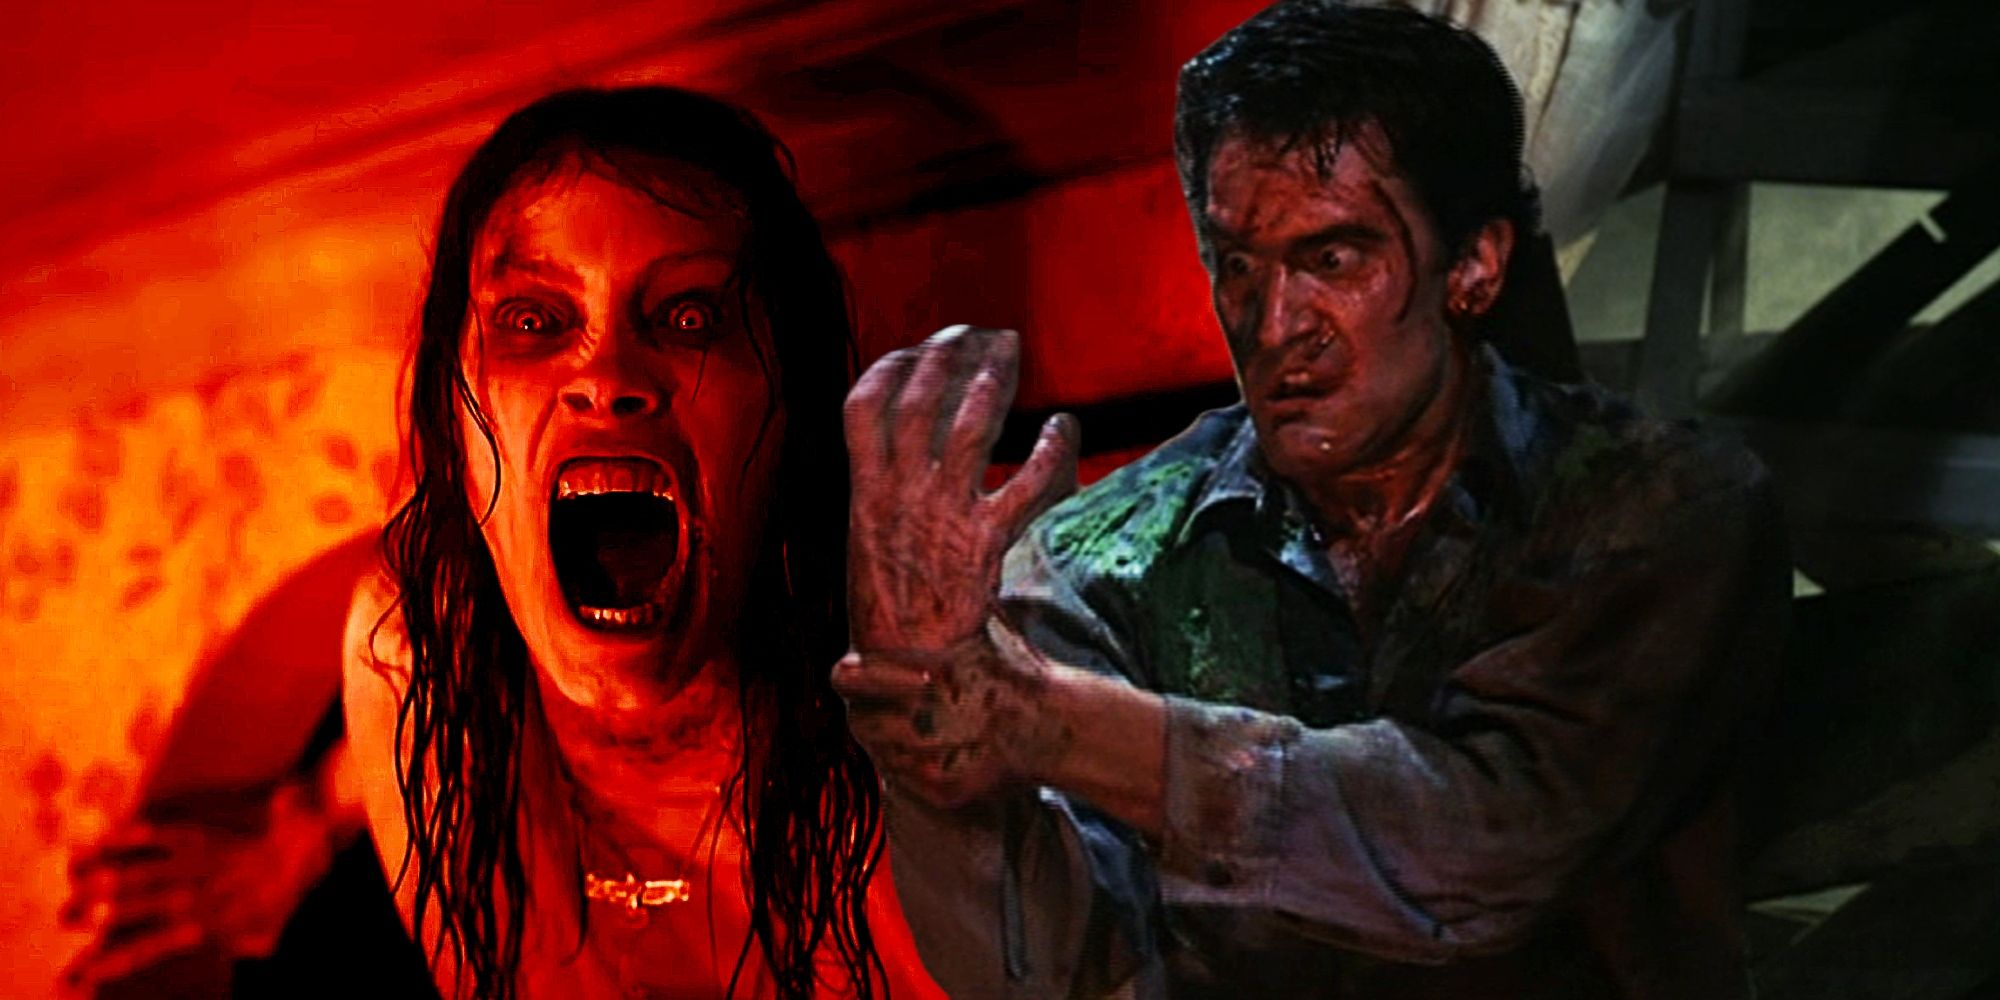 Evil Dead Rise: Release Date, Cast, Trailer, & Everything We Know